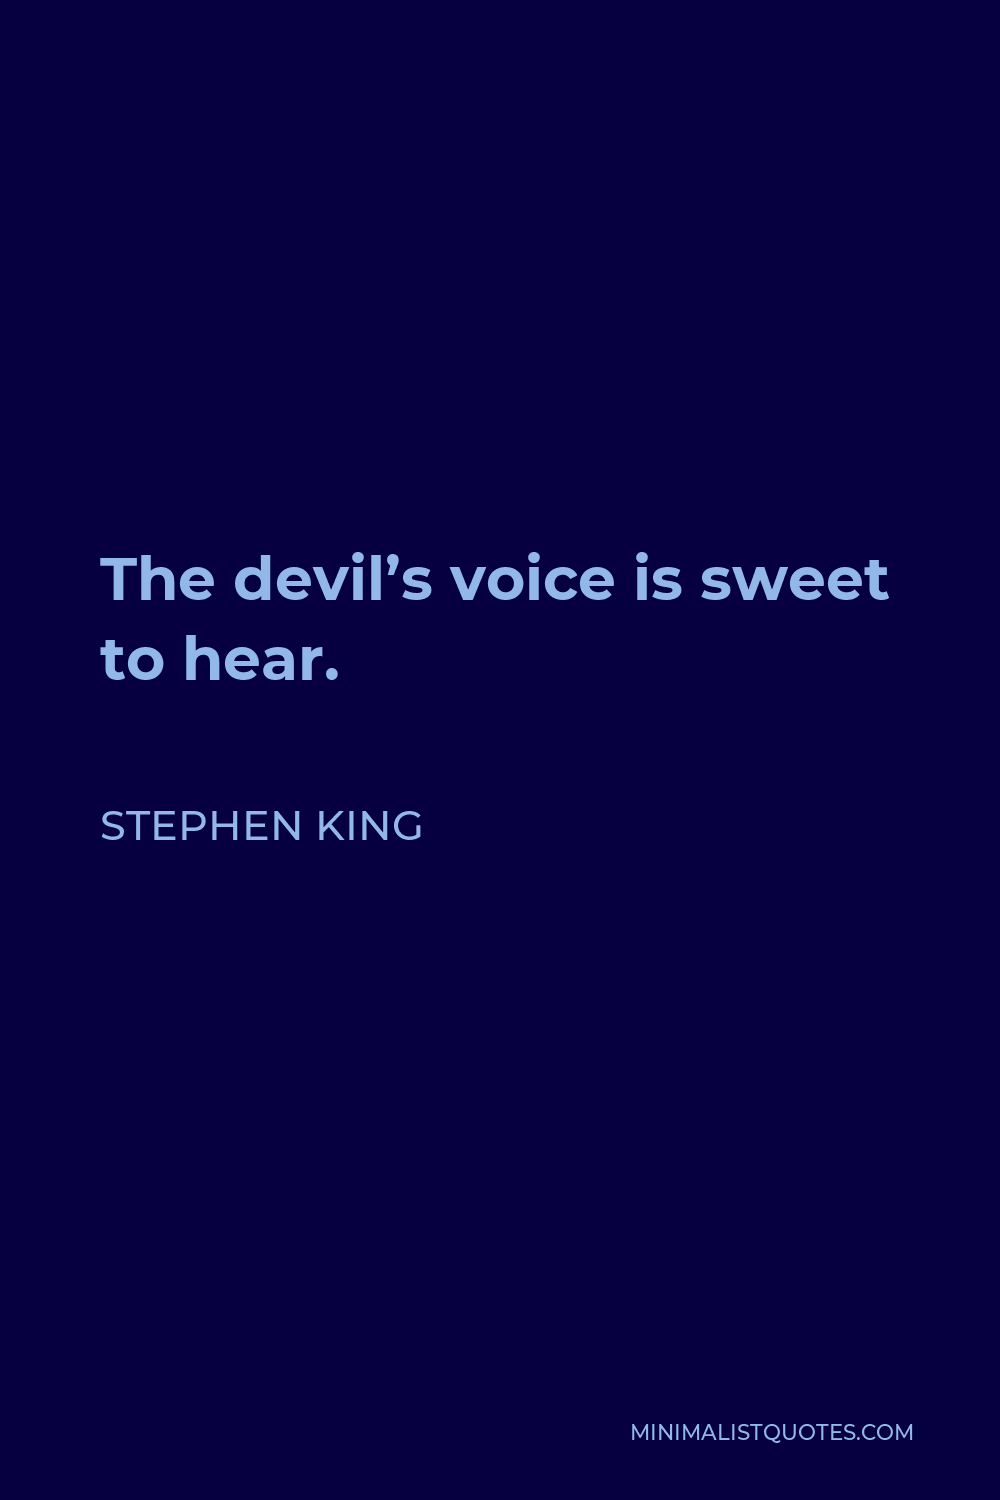 Stephen King Quote - The devil’s voice is sweet to hear.